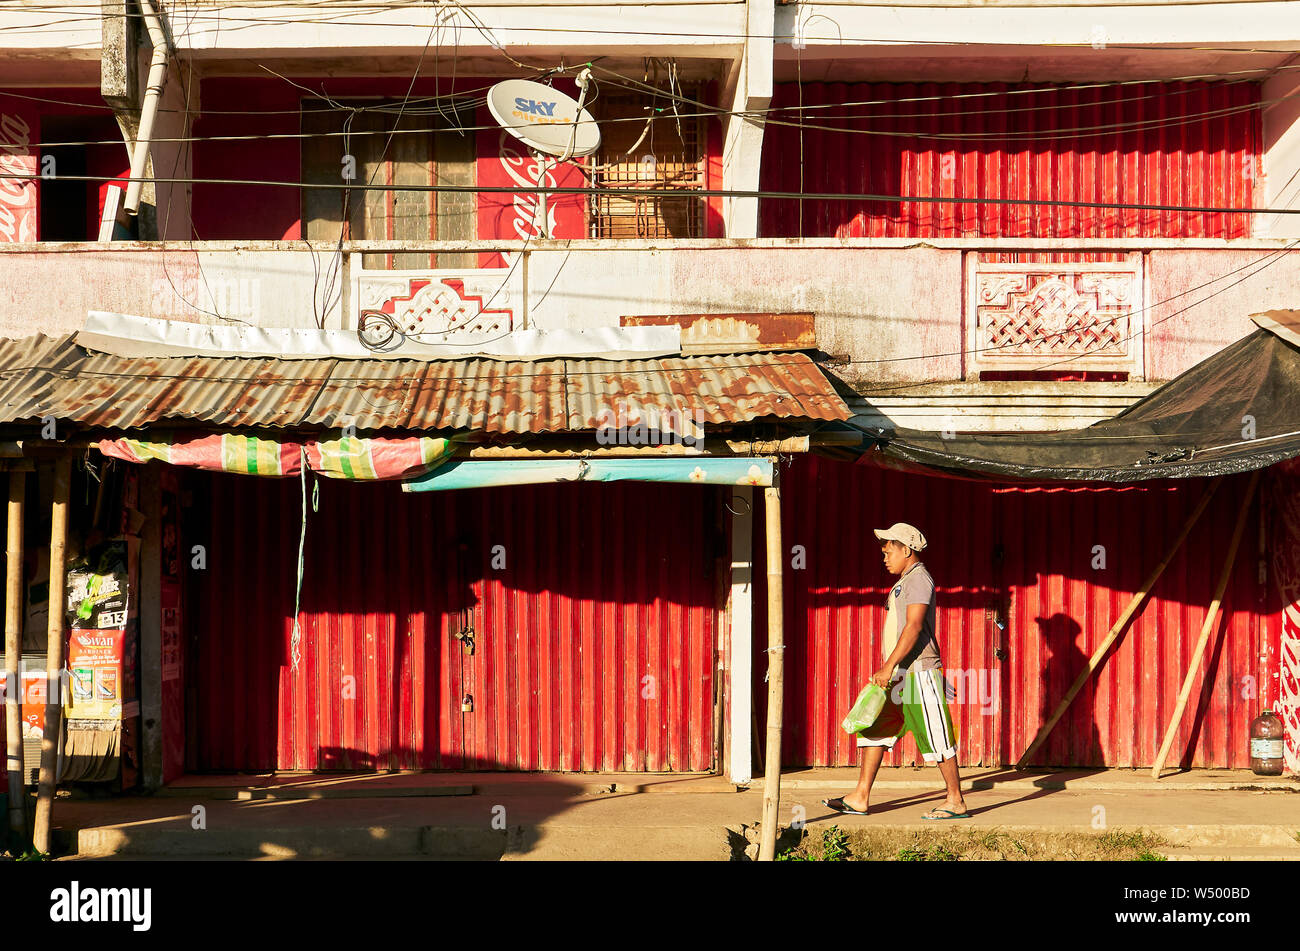 Cuartero, Capiz Province, Philippines: Young man walking in front of stores, closed with red metal folding doors, in late afternoon Stock Photo